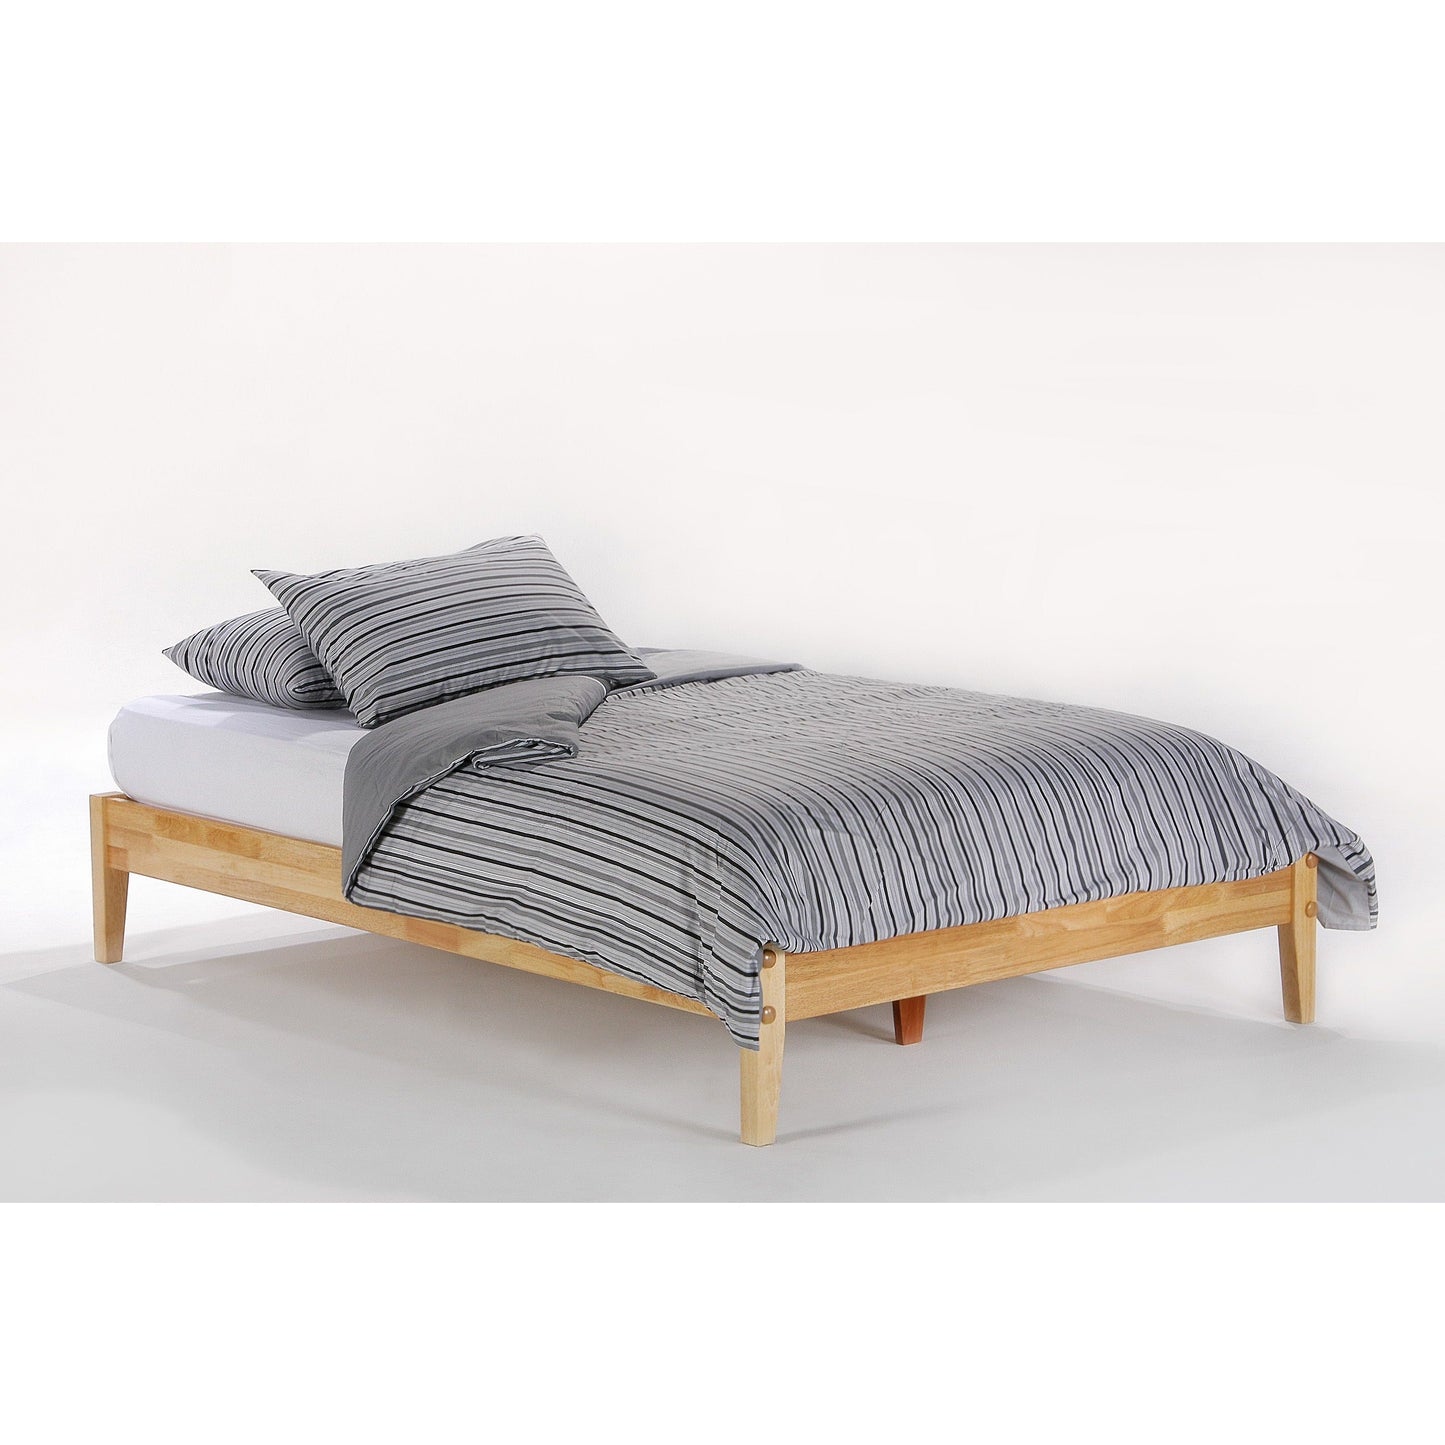 Night And Day Basic Full Platform Bed in cherry finish (P Series) BAS-FUL-COM-P-CH